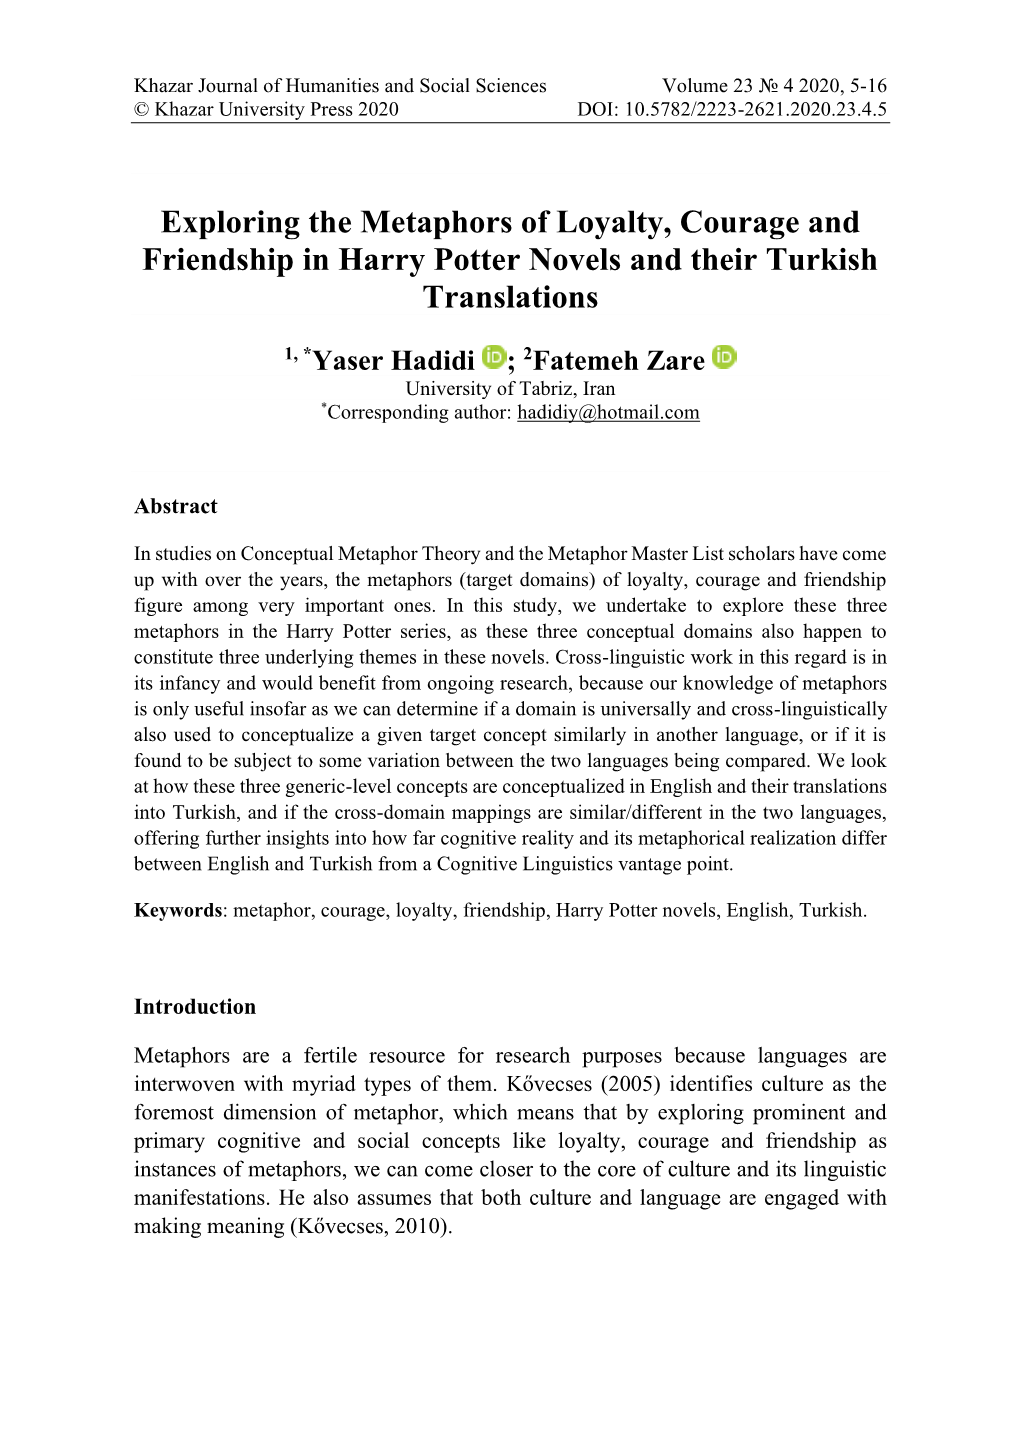 Exploring the Metaphors of Loyalty, Courage and Friendship in Harry Potter Novels and Their Turkish Translations